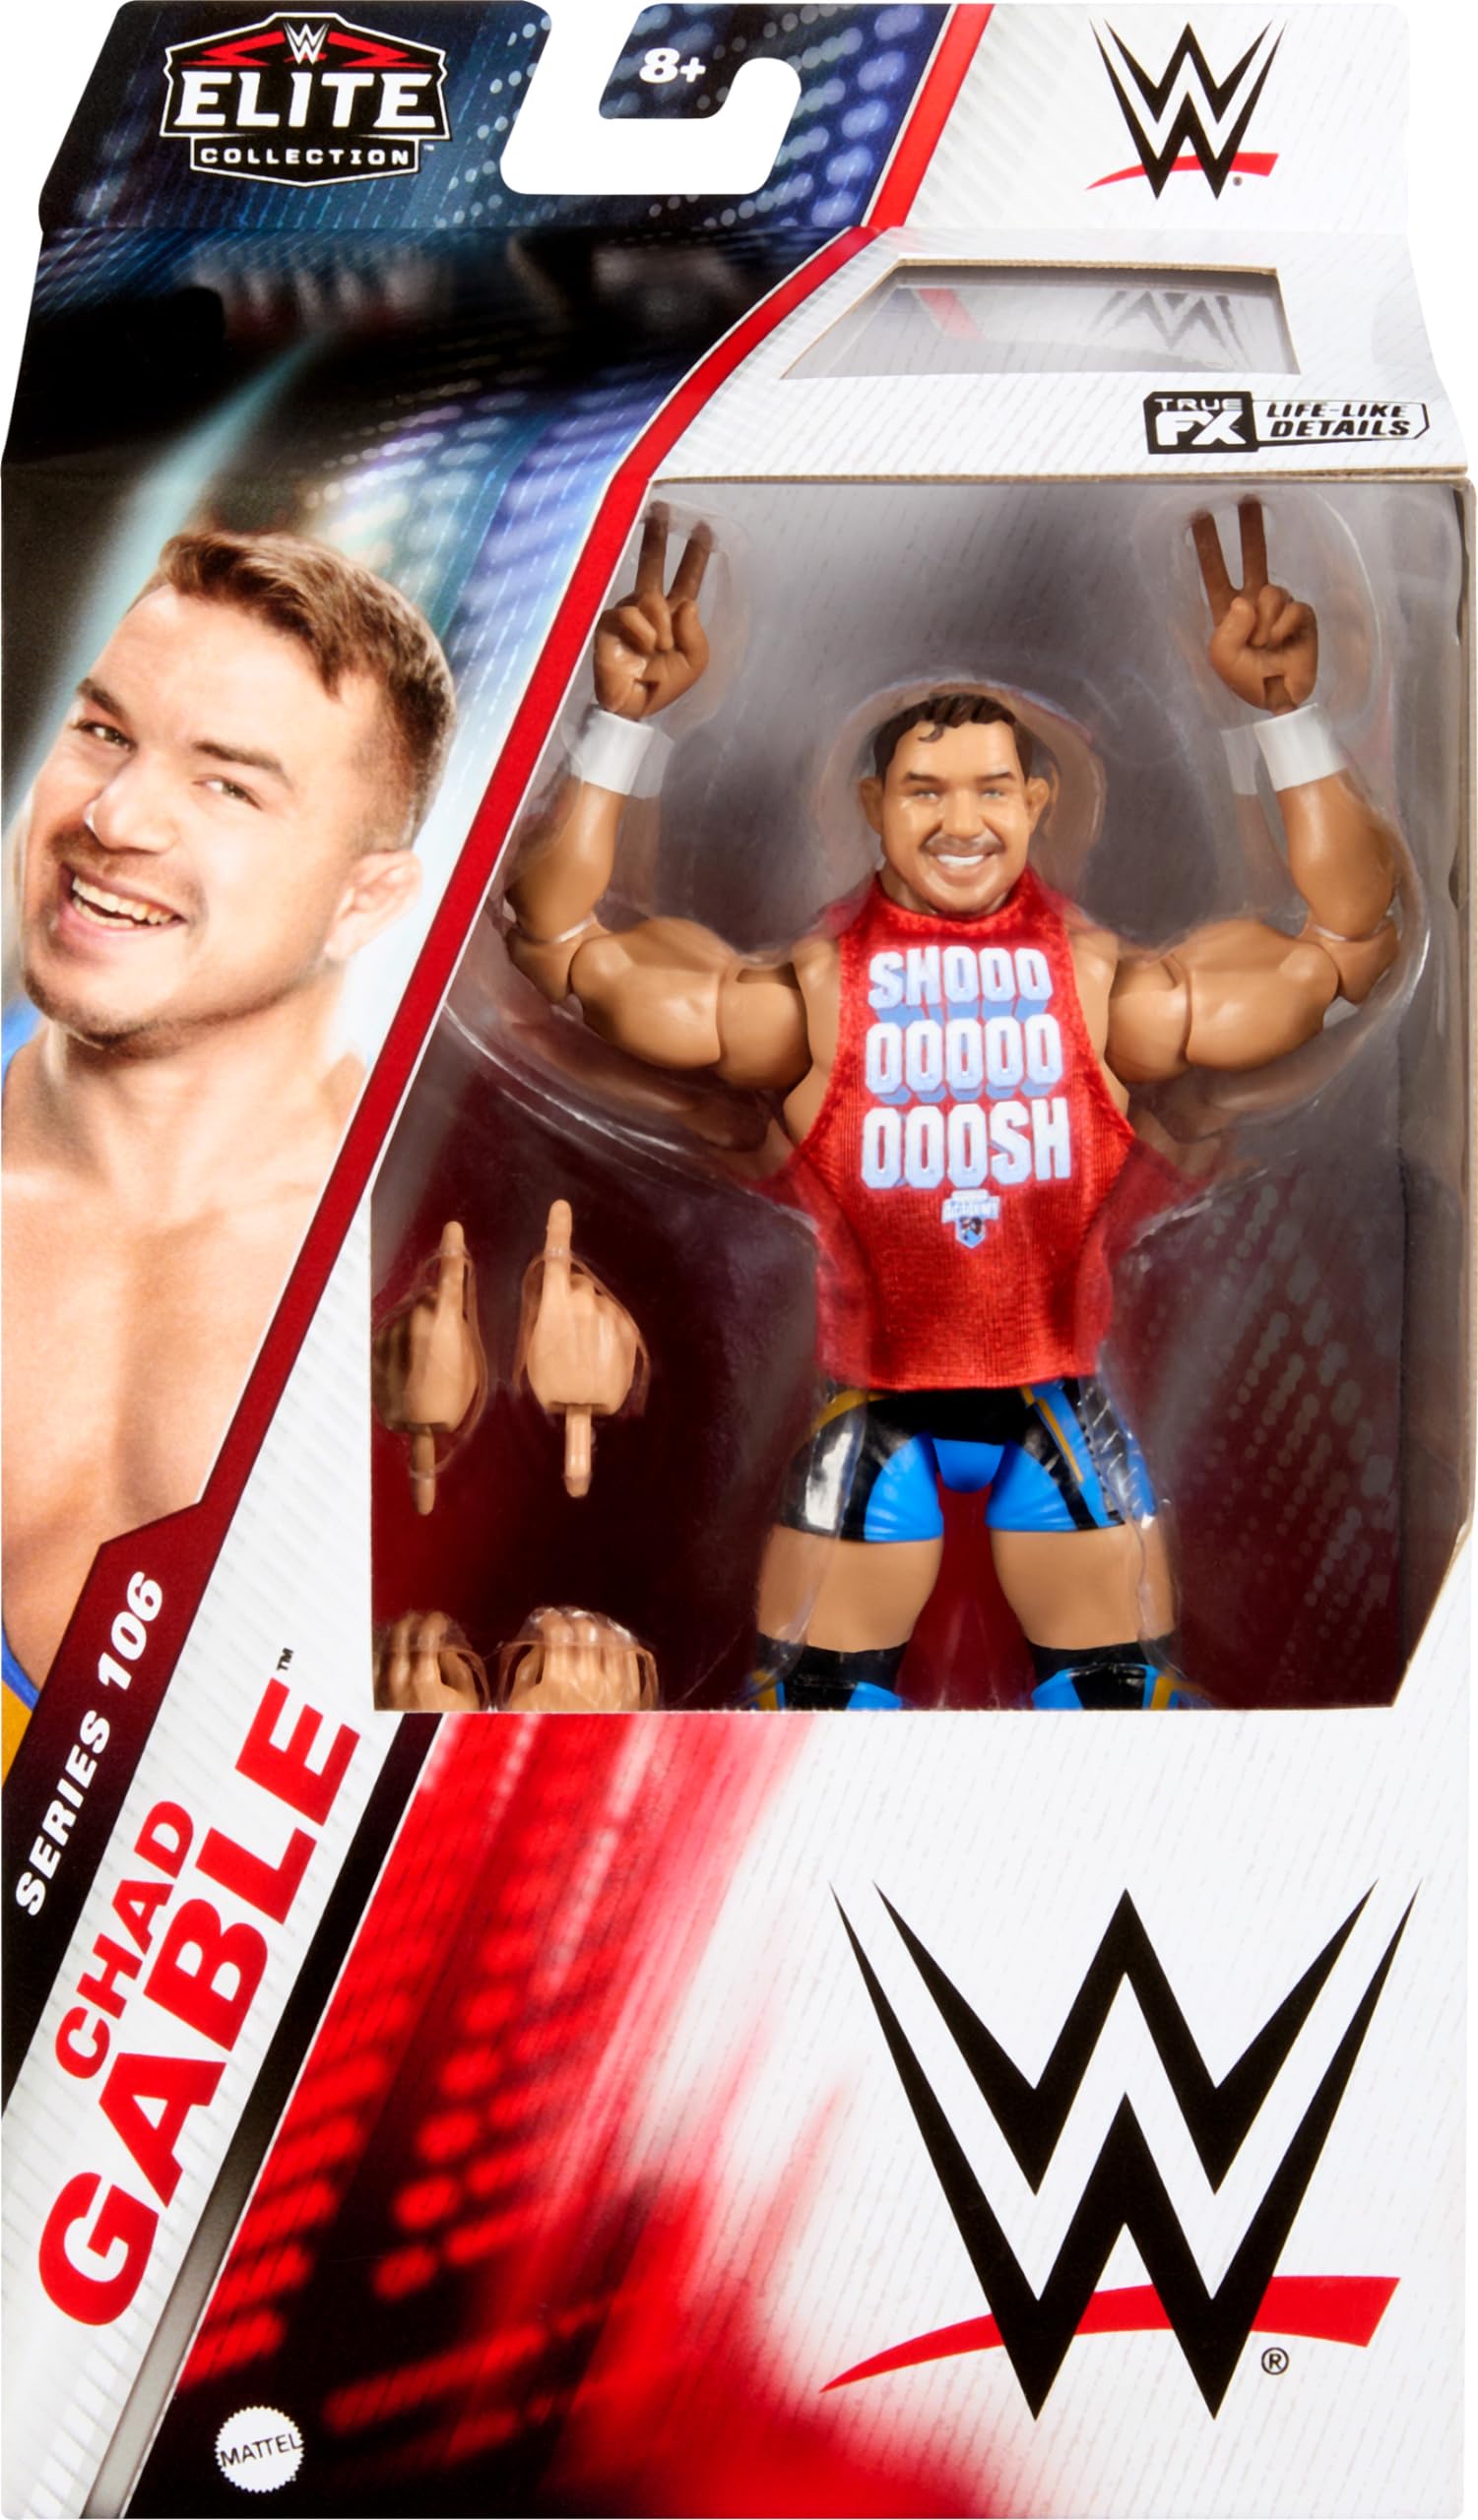 WWE Elite Action Figure & Accessories, 6-inch Collectible Chad Gable with 25 Articulation Points, Life-Like Look & Swappable Hands​​